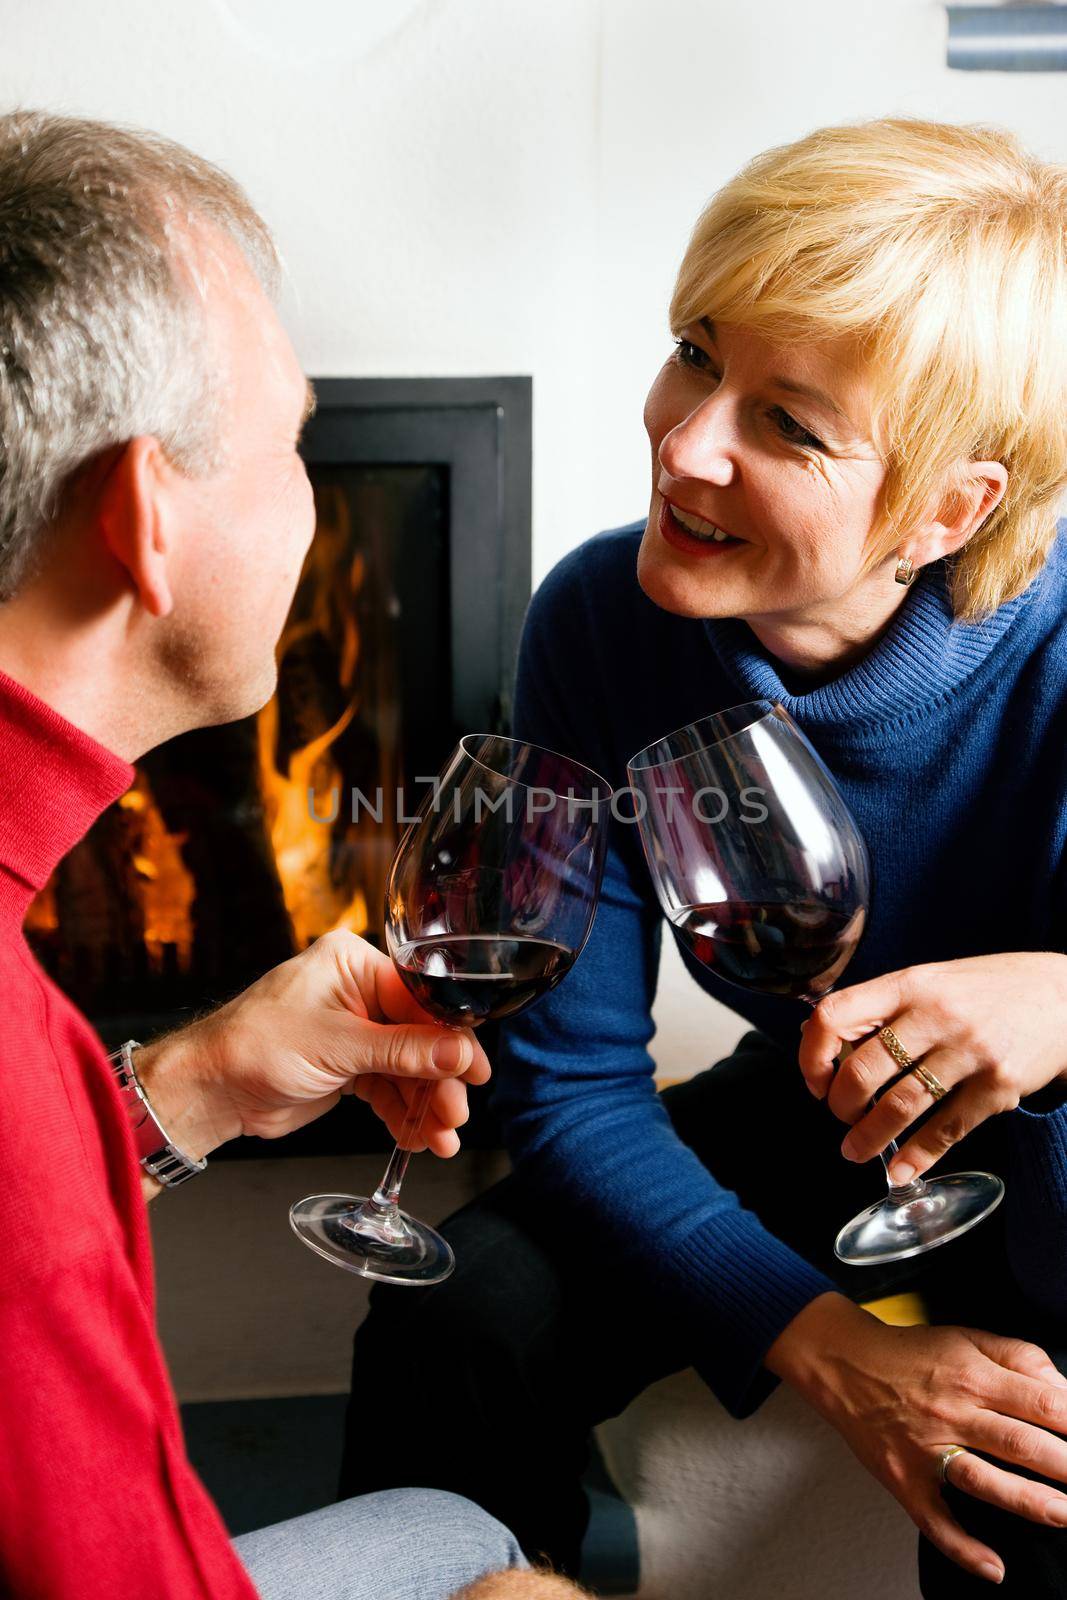 Mature couple having fun clinking glasses with red wine in a romantic setting